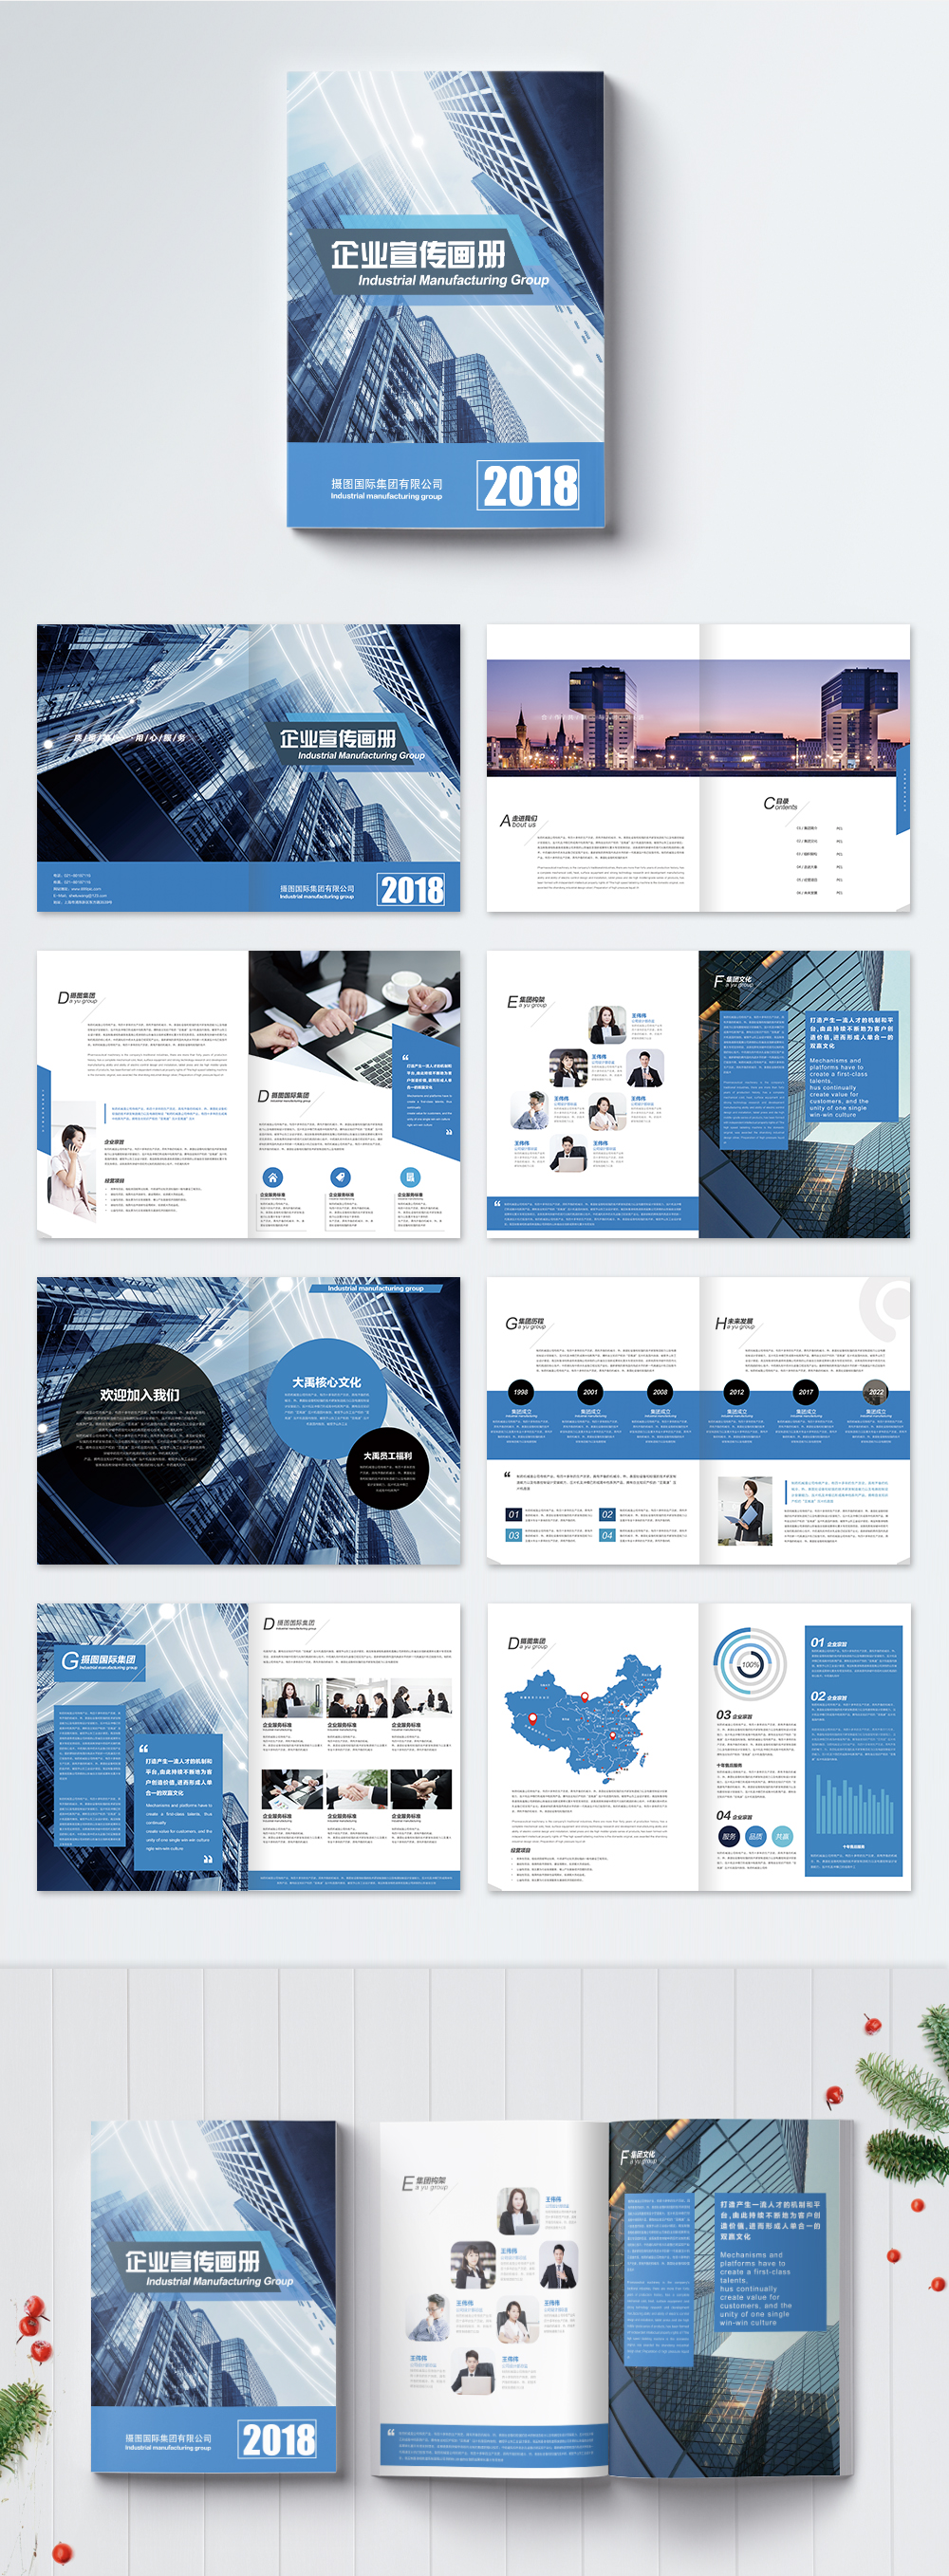 Blue business brochure template image_picture free download 400498165 ...